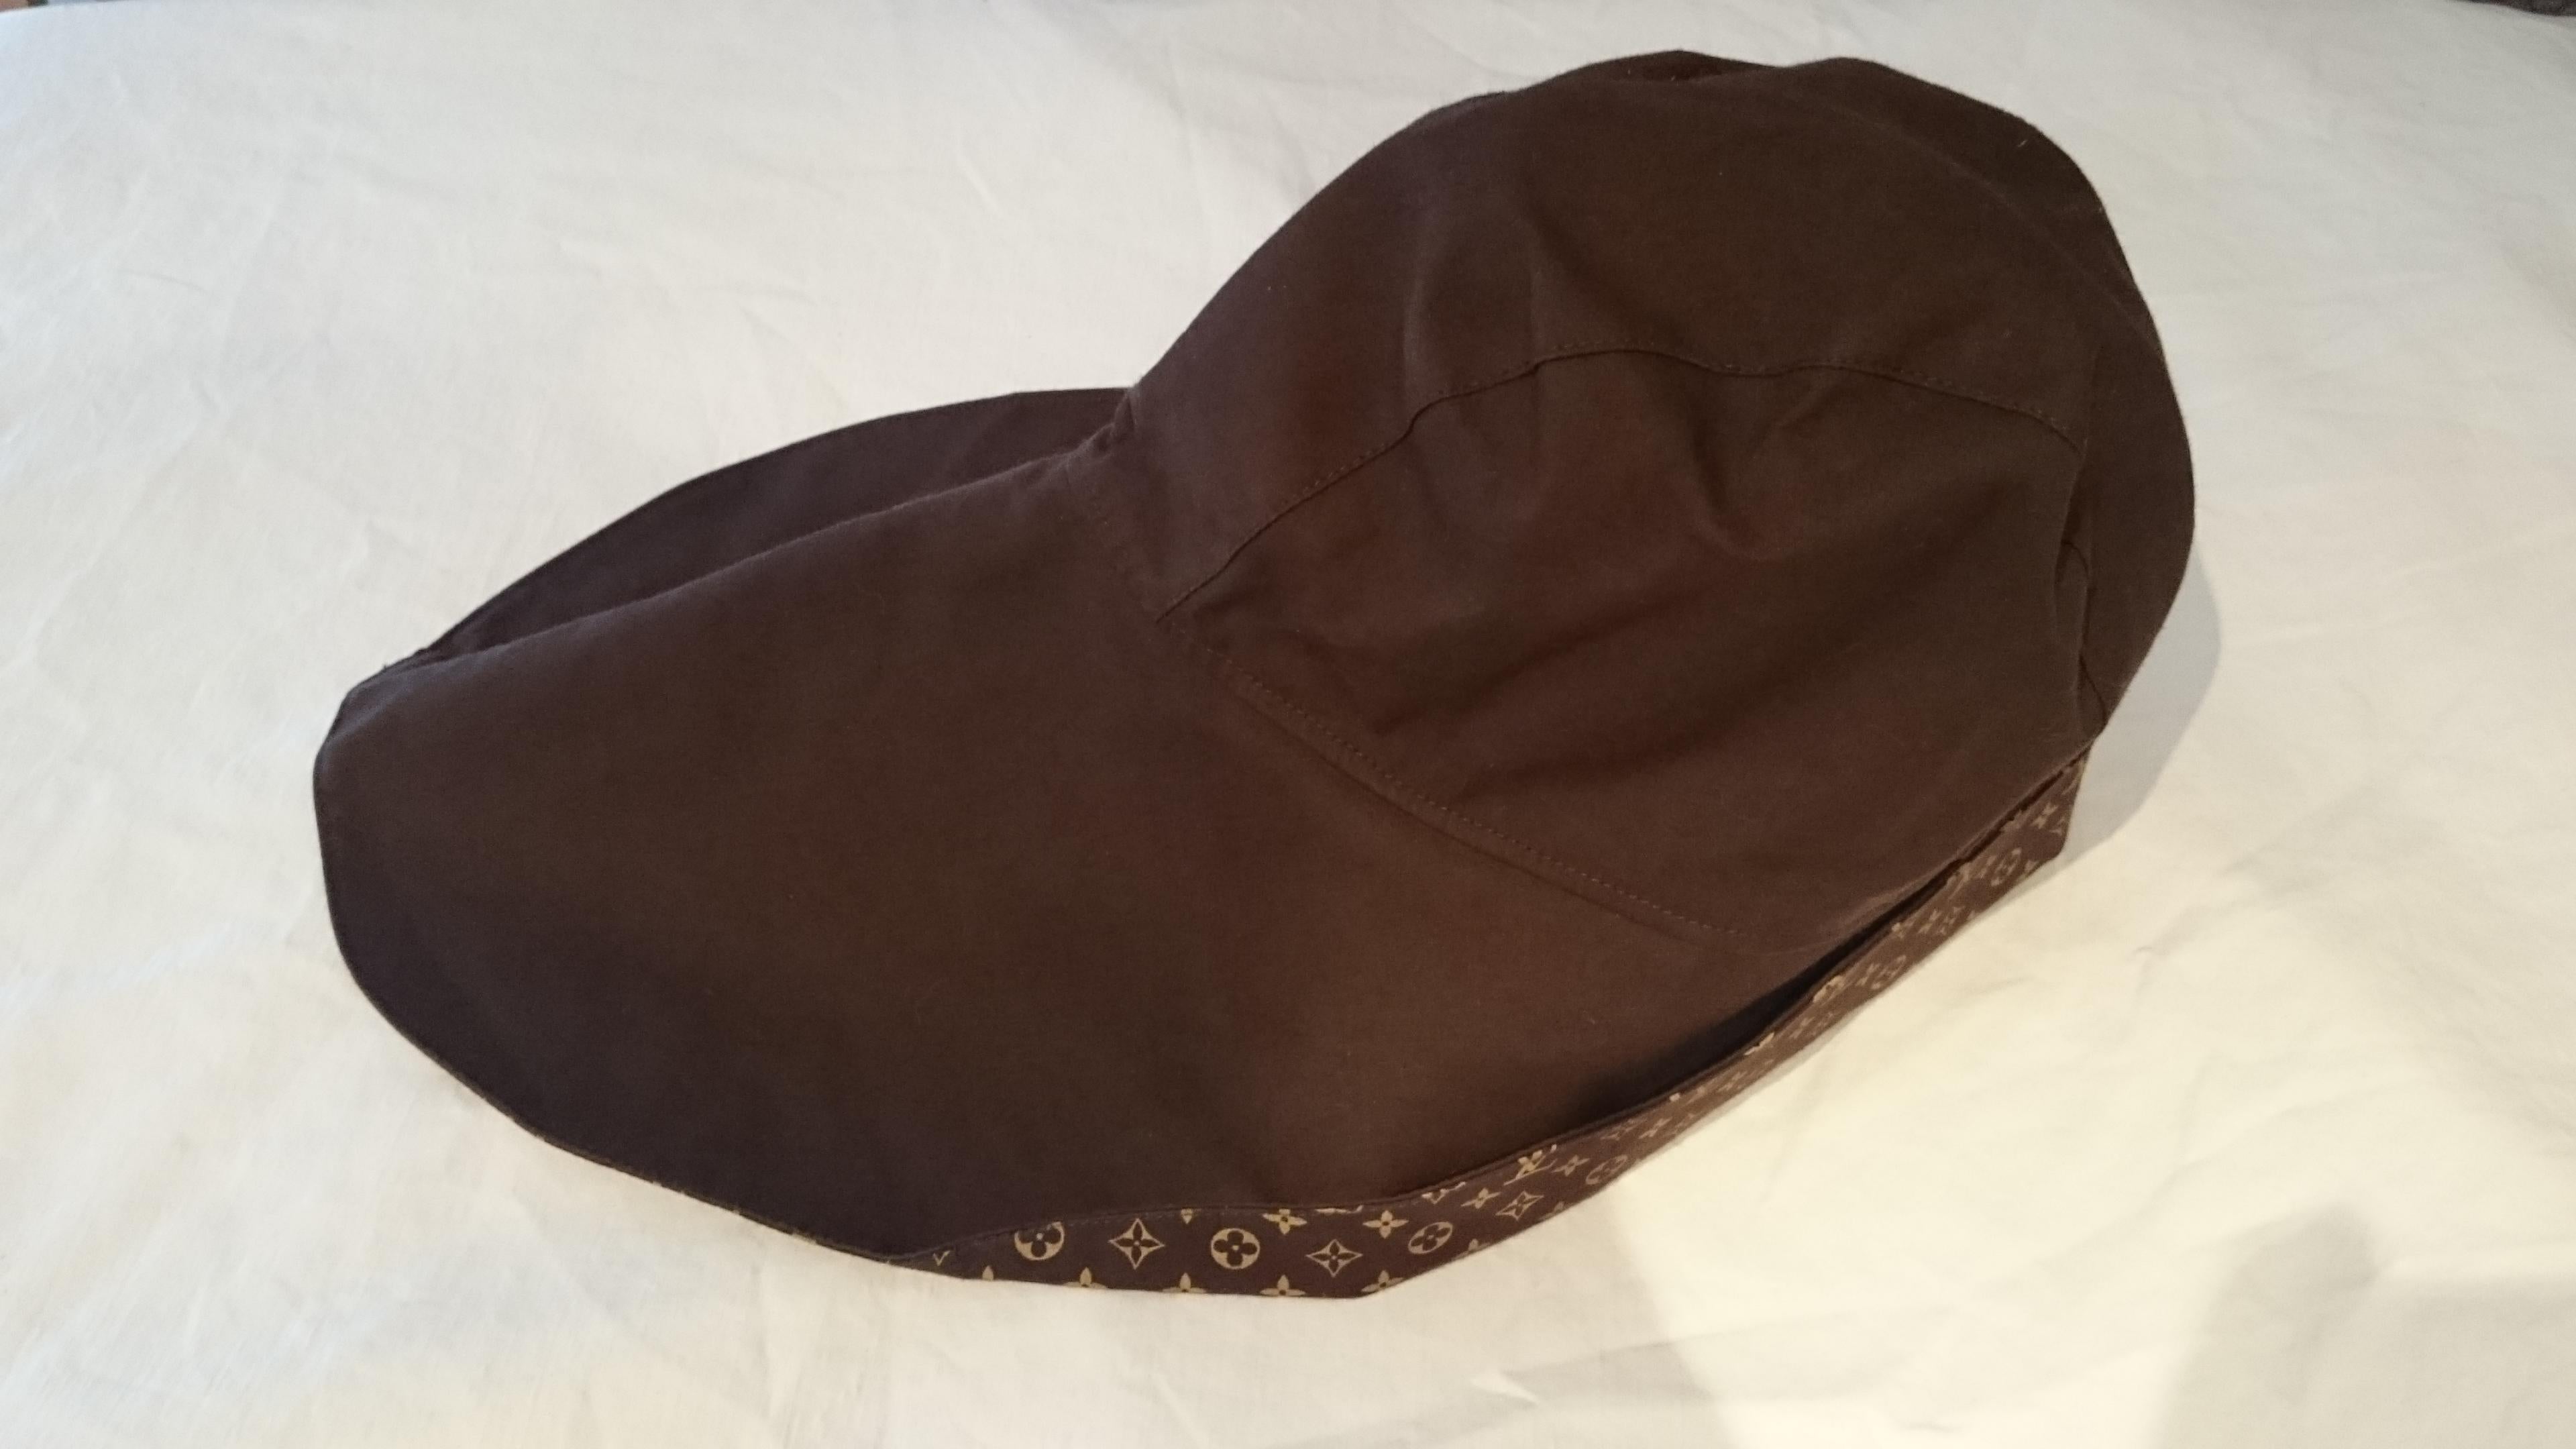 Louis VUITTON brown monogram collection hat - Unworn, New with tags.
..
Marked SIZE: S
Measurements cm: head circumference 52  (20,47 inch), lenght 47  (18,50 inch).
Measurements provided as a courtesy only, not a guarantee of fit. 
By 